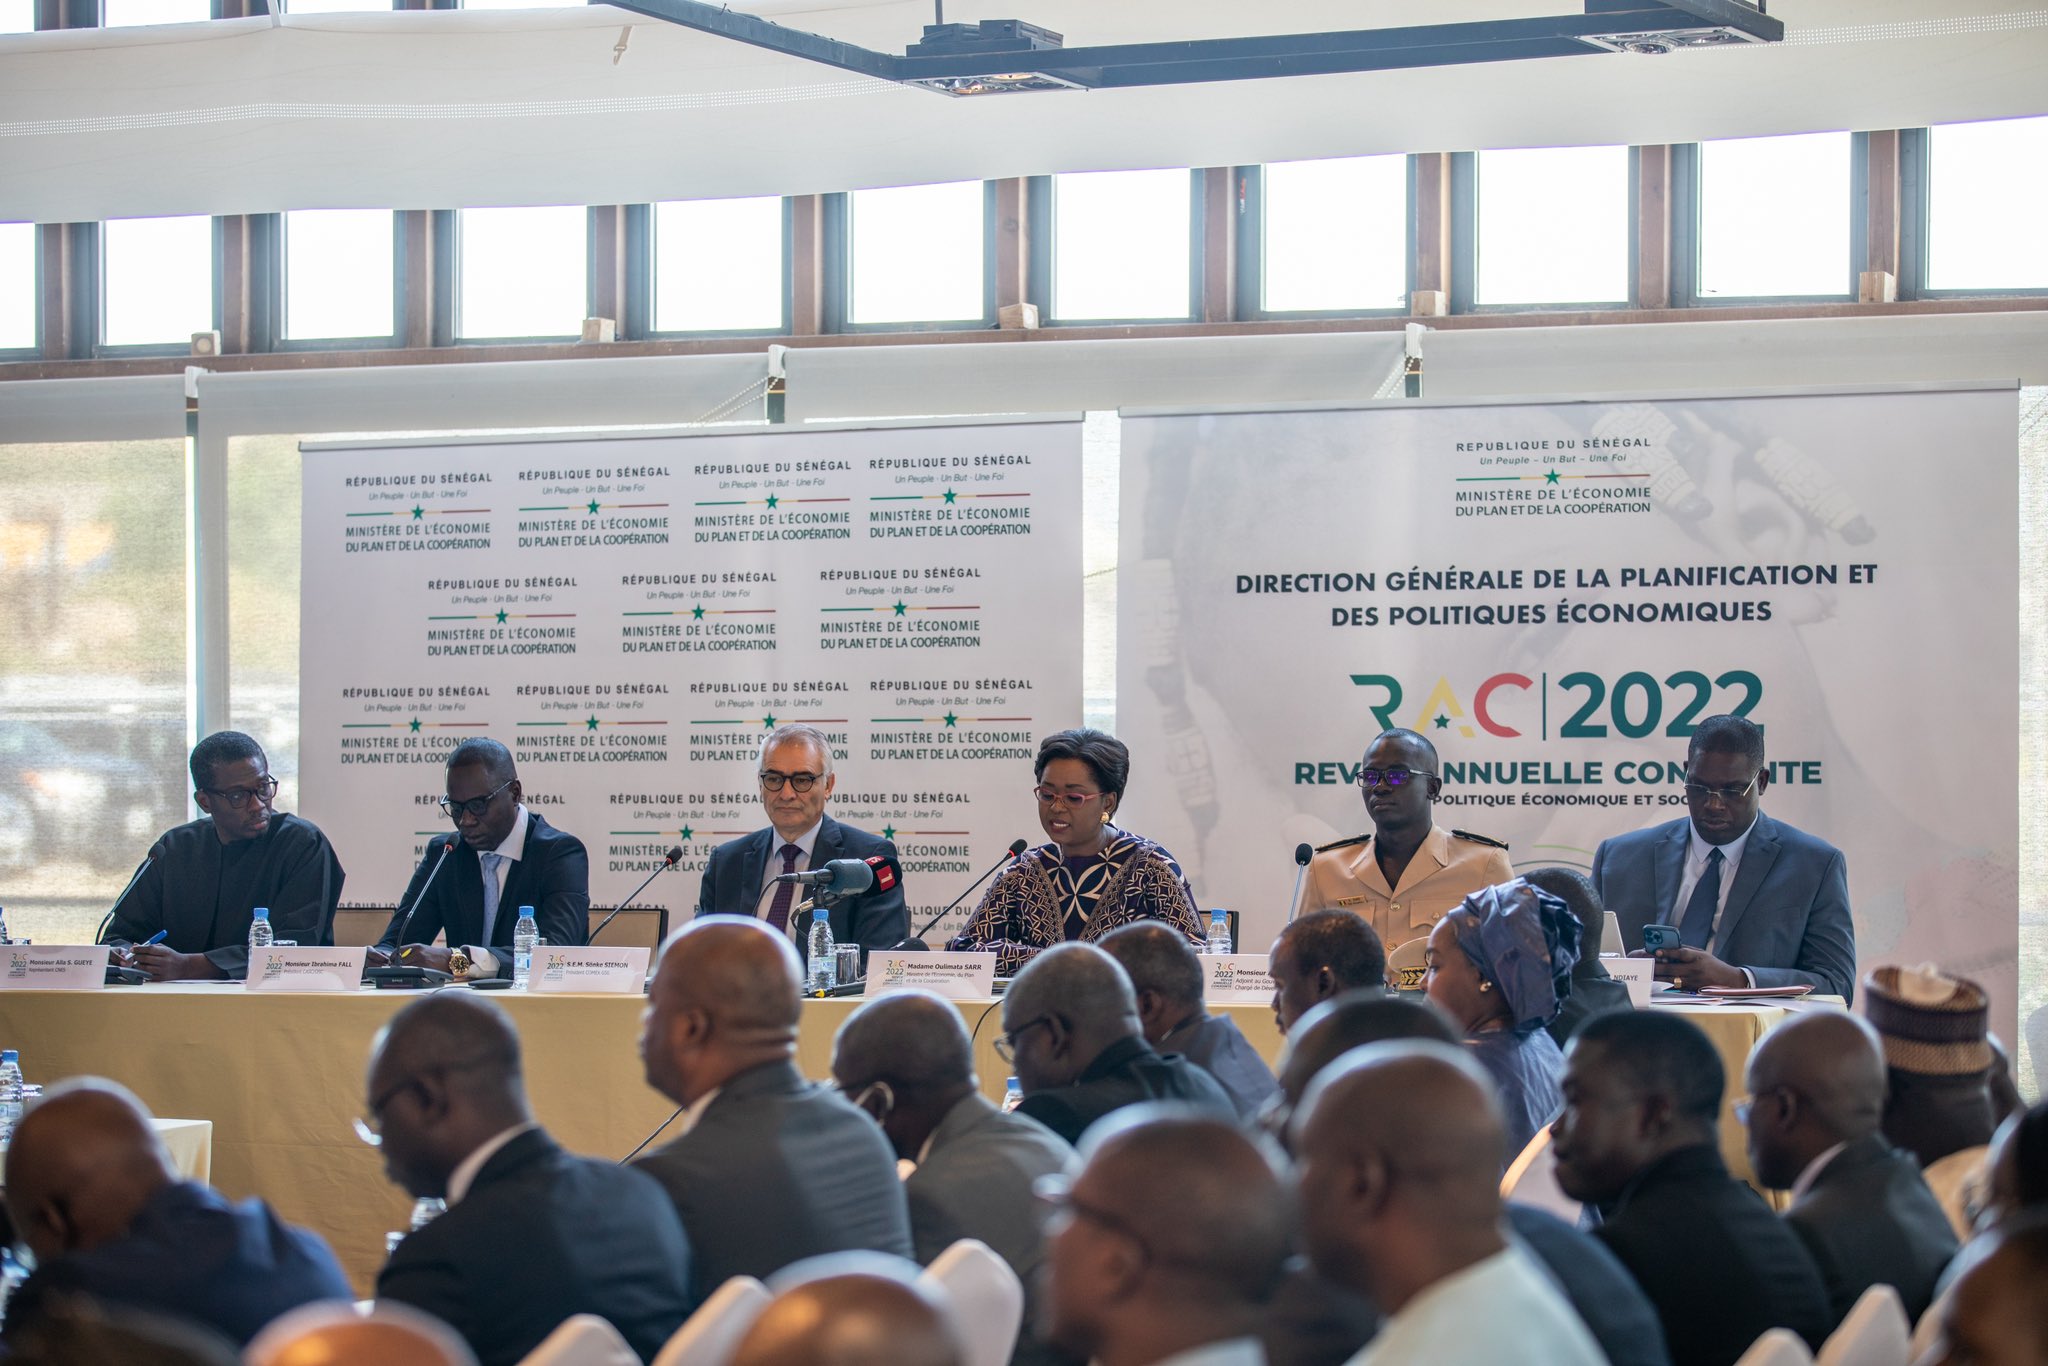  Joint annual review 2021: the Senegalese government achieves “economic performance in 2021” 